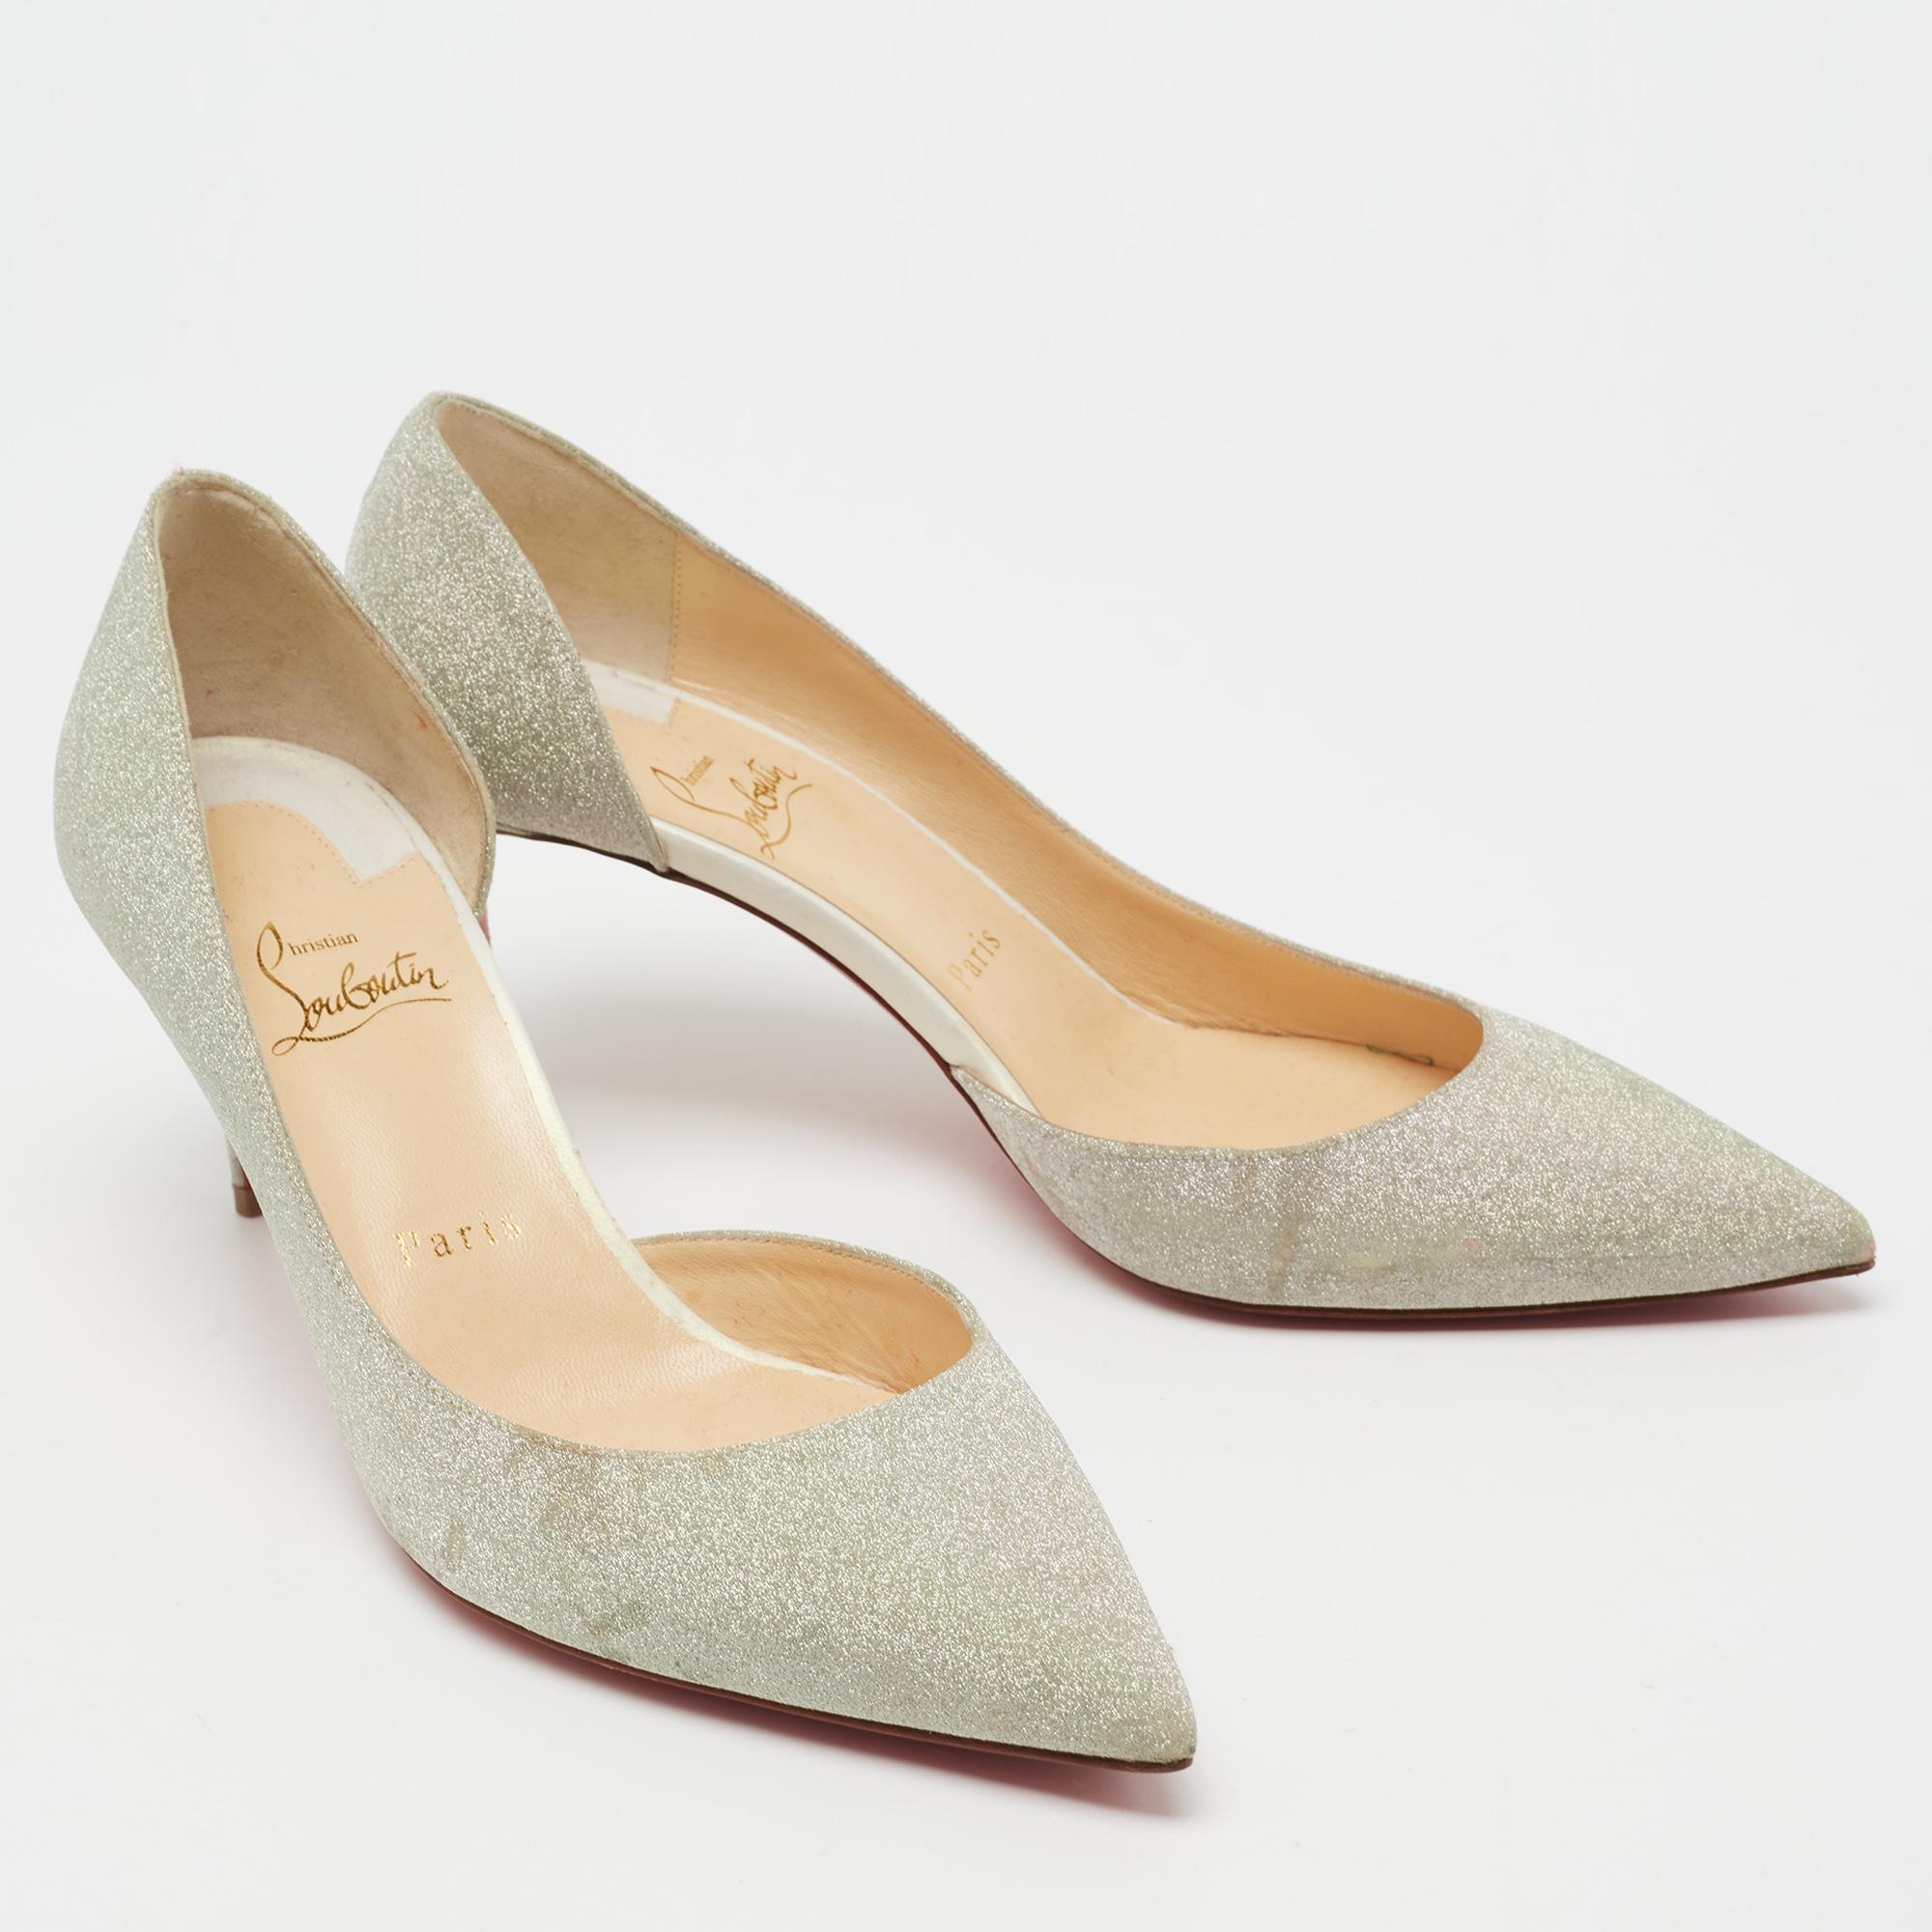 Skilfully crafted from glitter in a D'orsay style with pointed toes, these Christian Louboutin pumps come ready to give you a high-fashion experience. The silver pumps, with sharp-cut toplines, are balanced on 7 cm heels and finished with